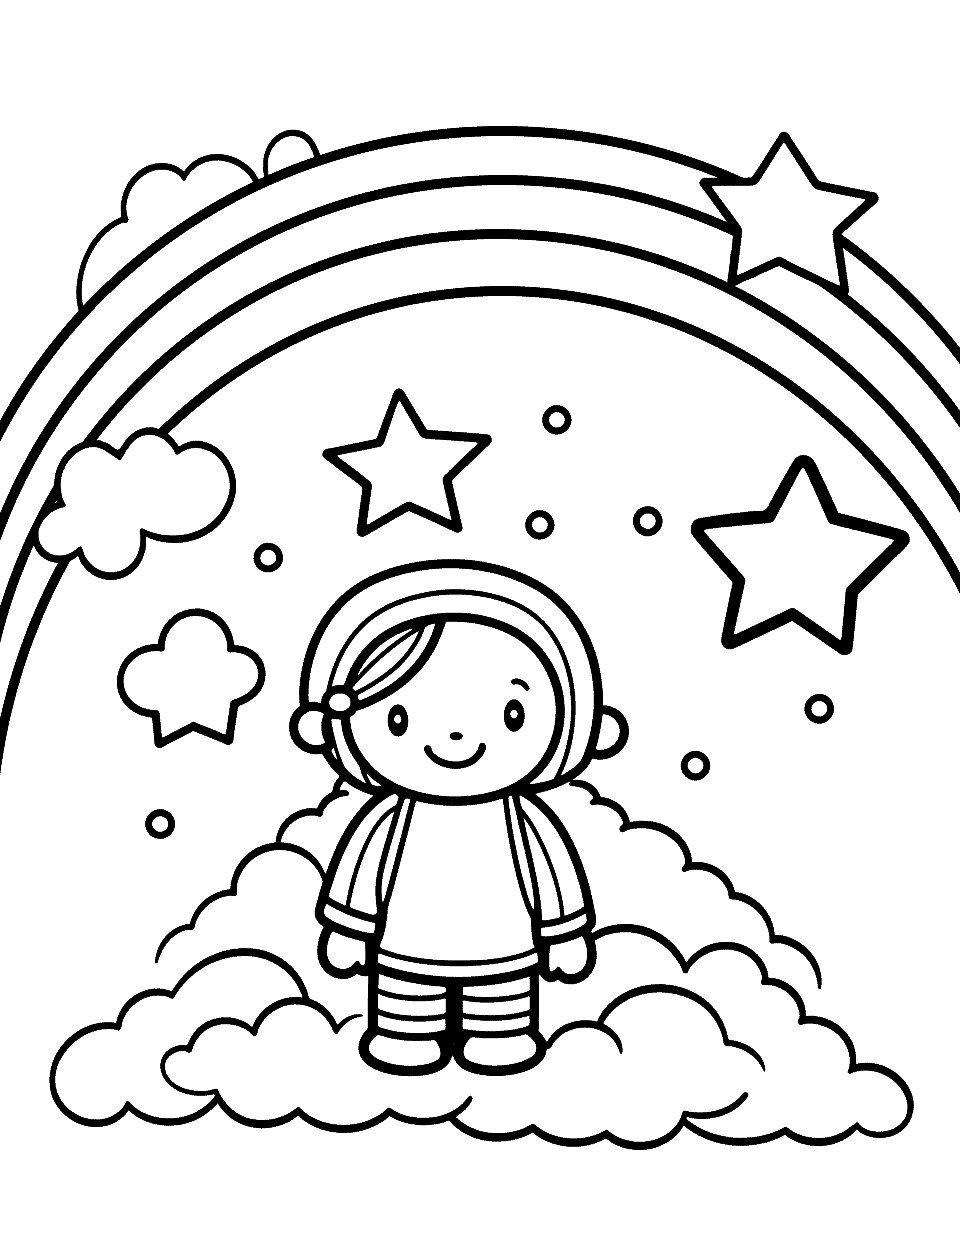 Space Rainbow Coloring Page - An astronaut discovering a rainbow in space, great for sparking imaginations.